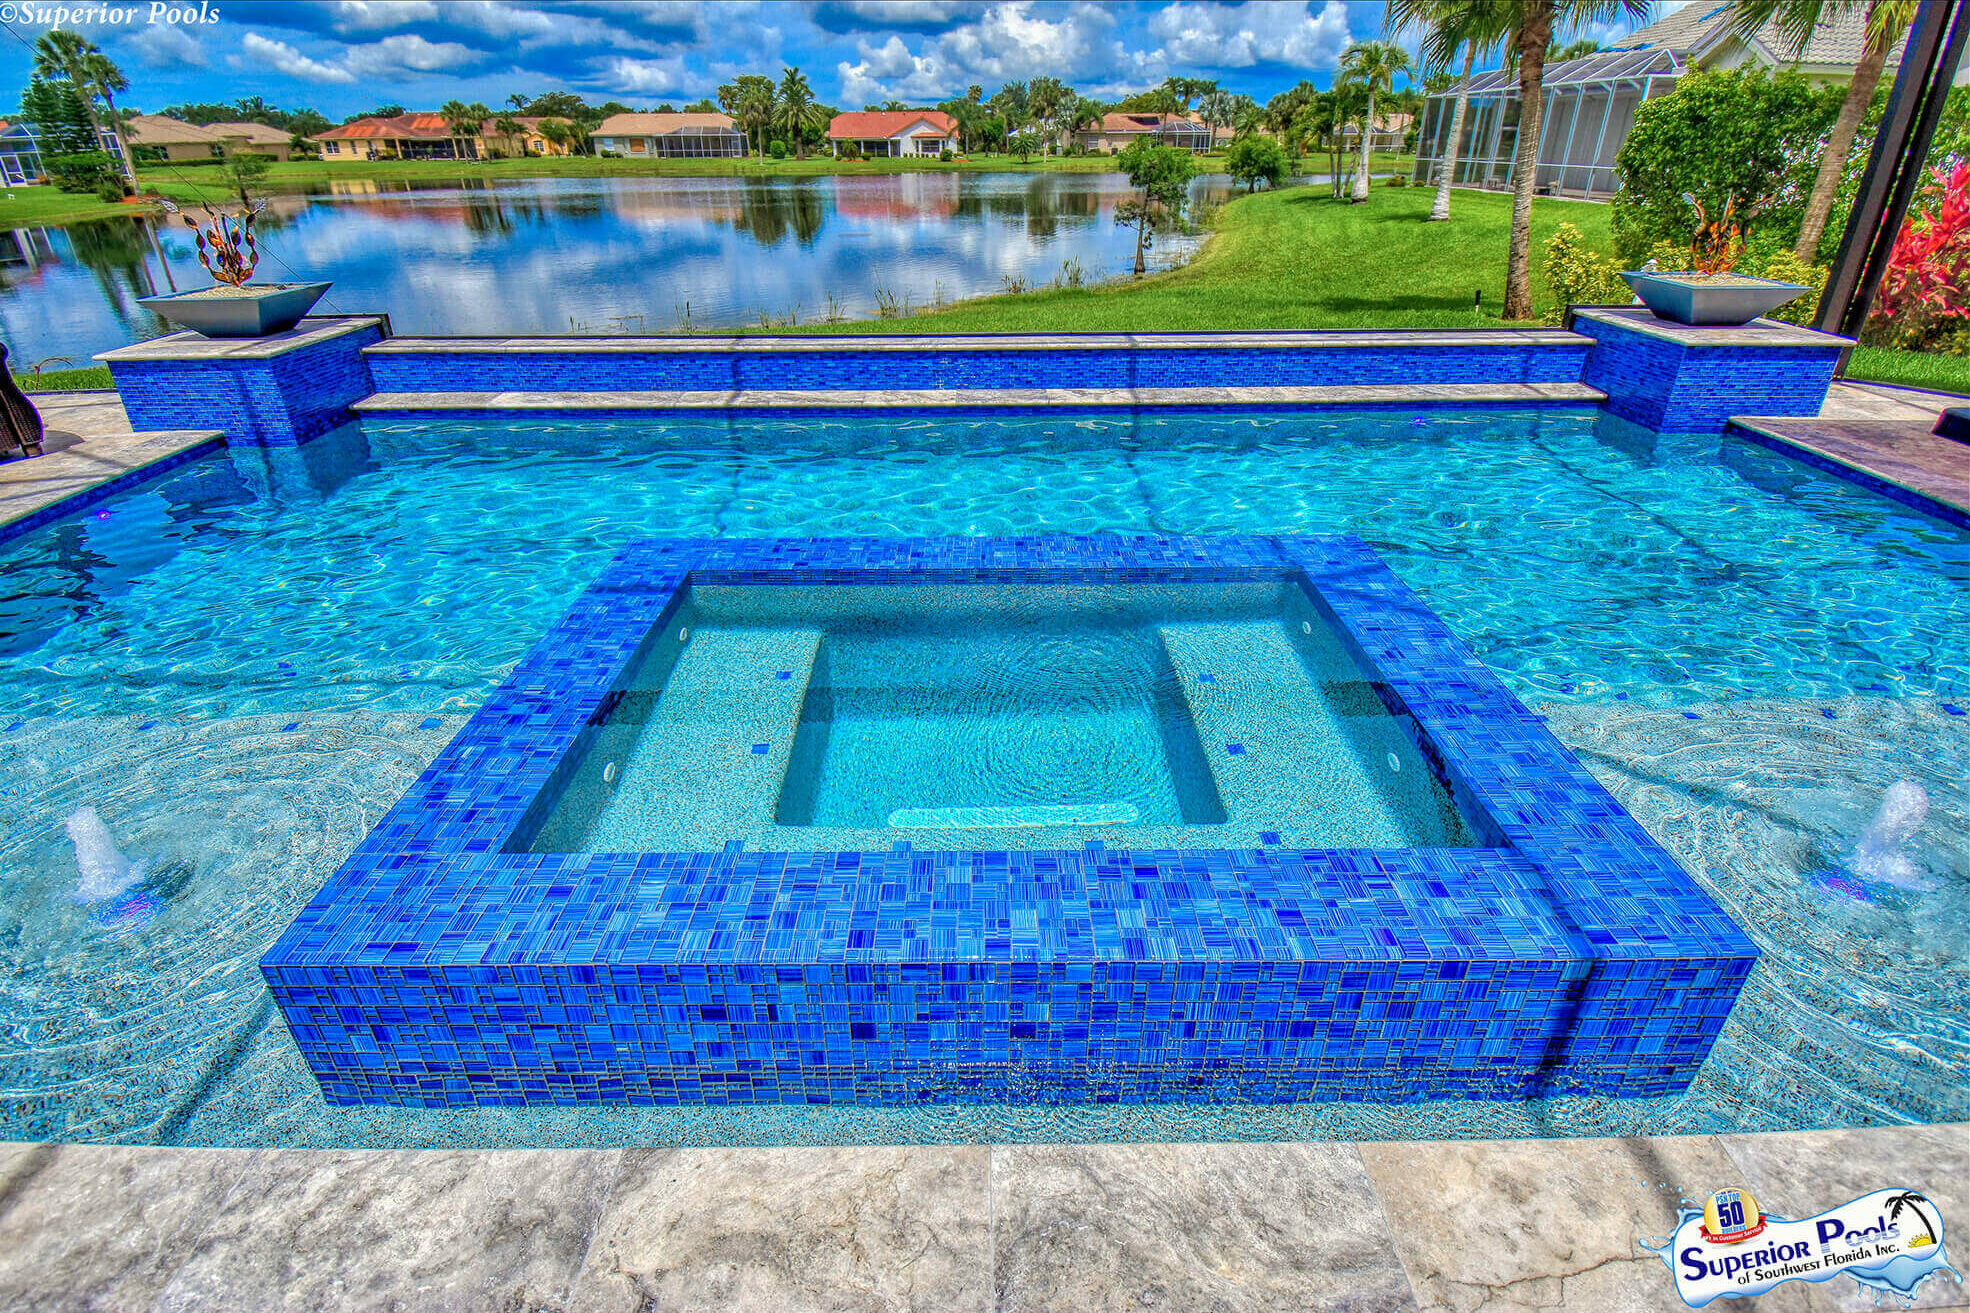 a blue tiled spa and pool in Ft Myers